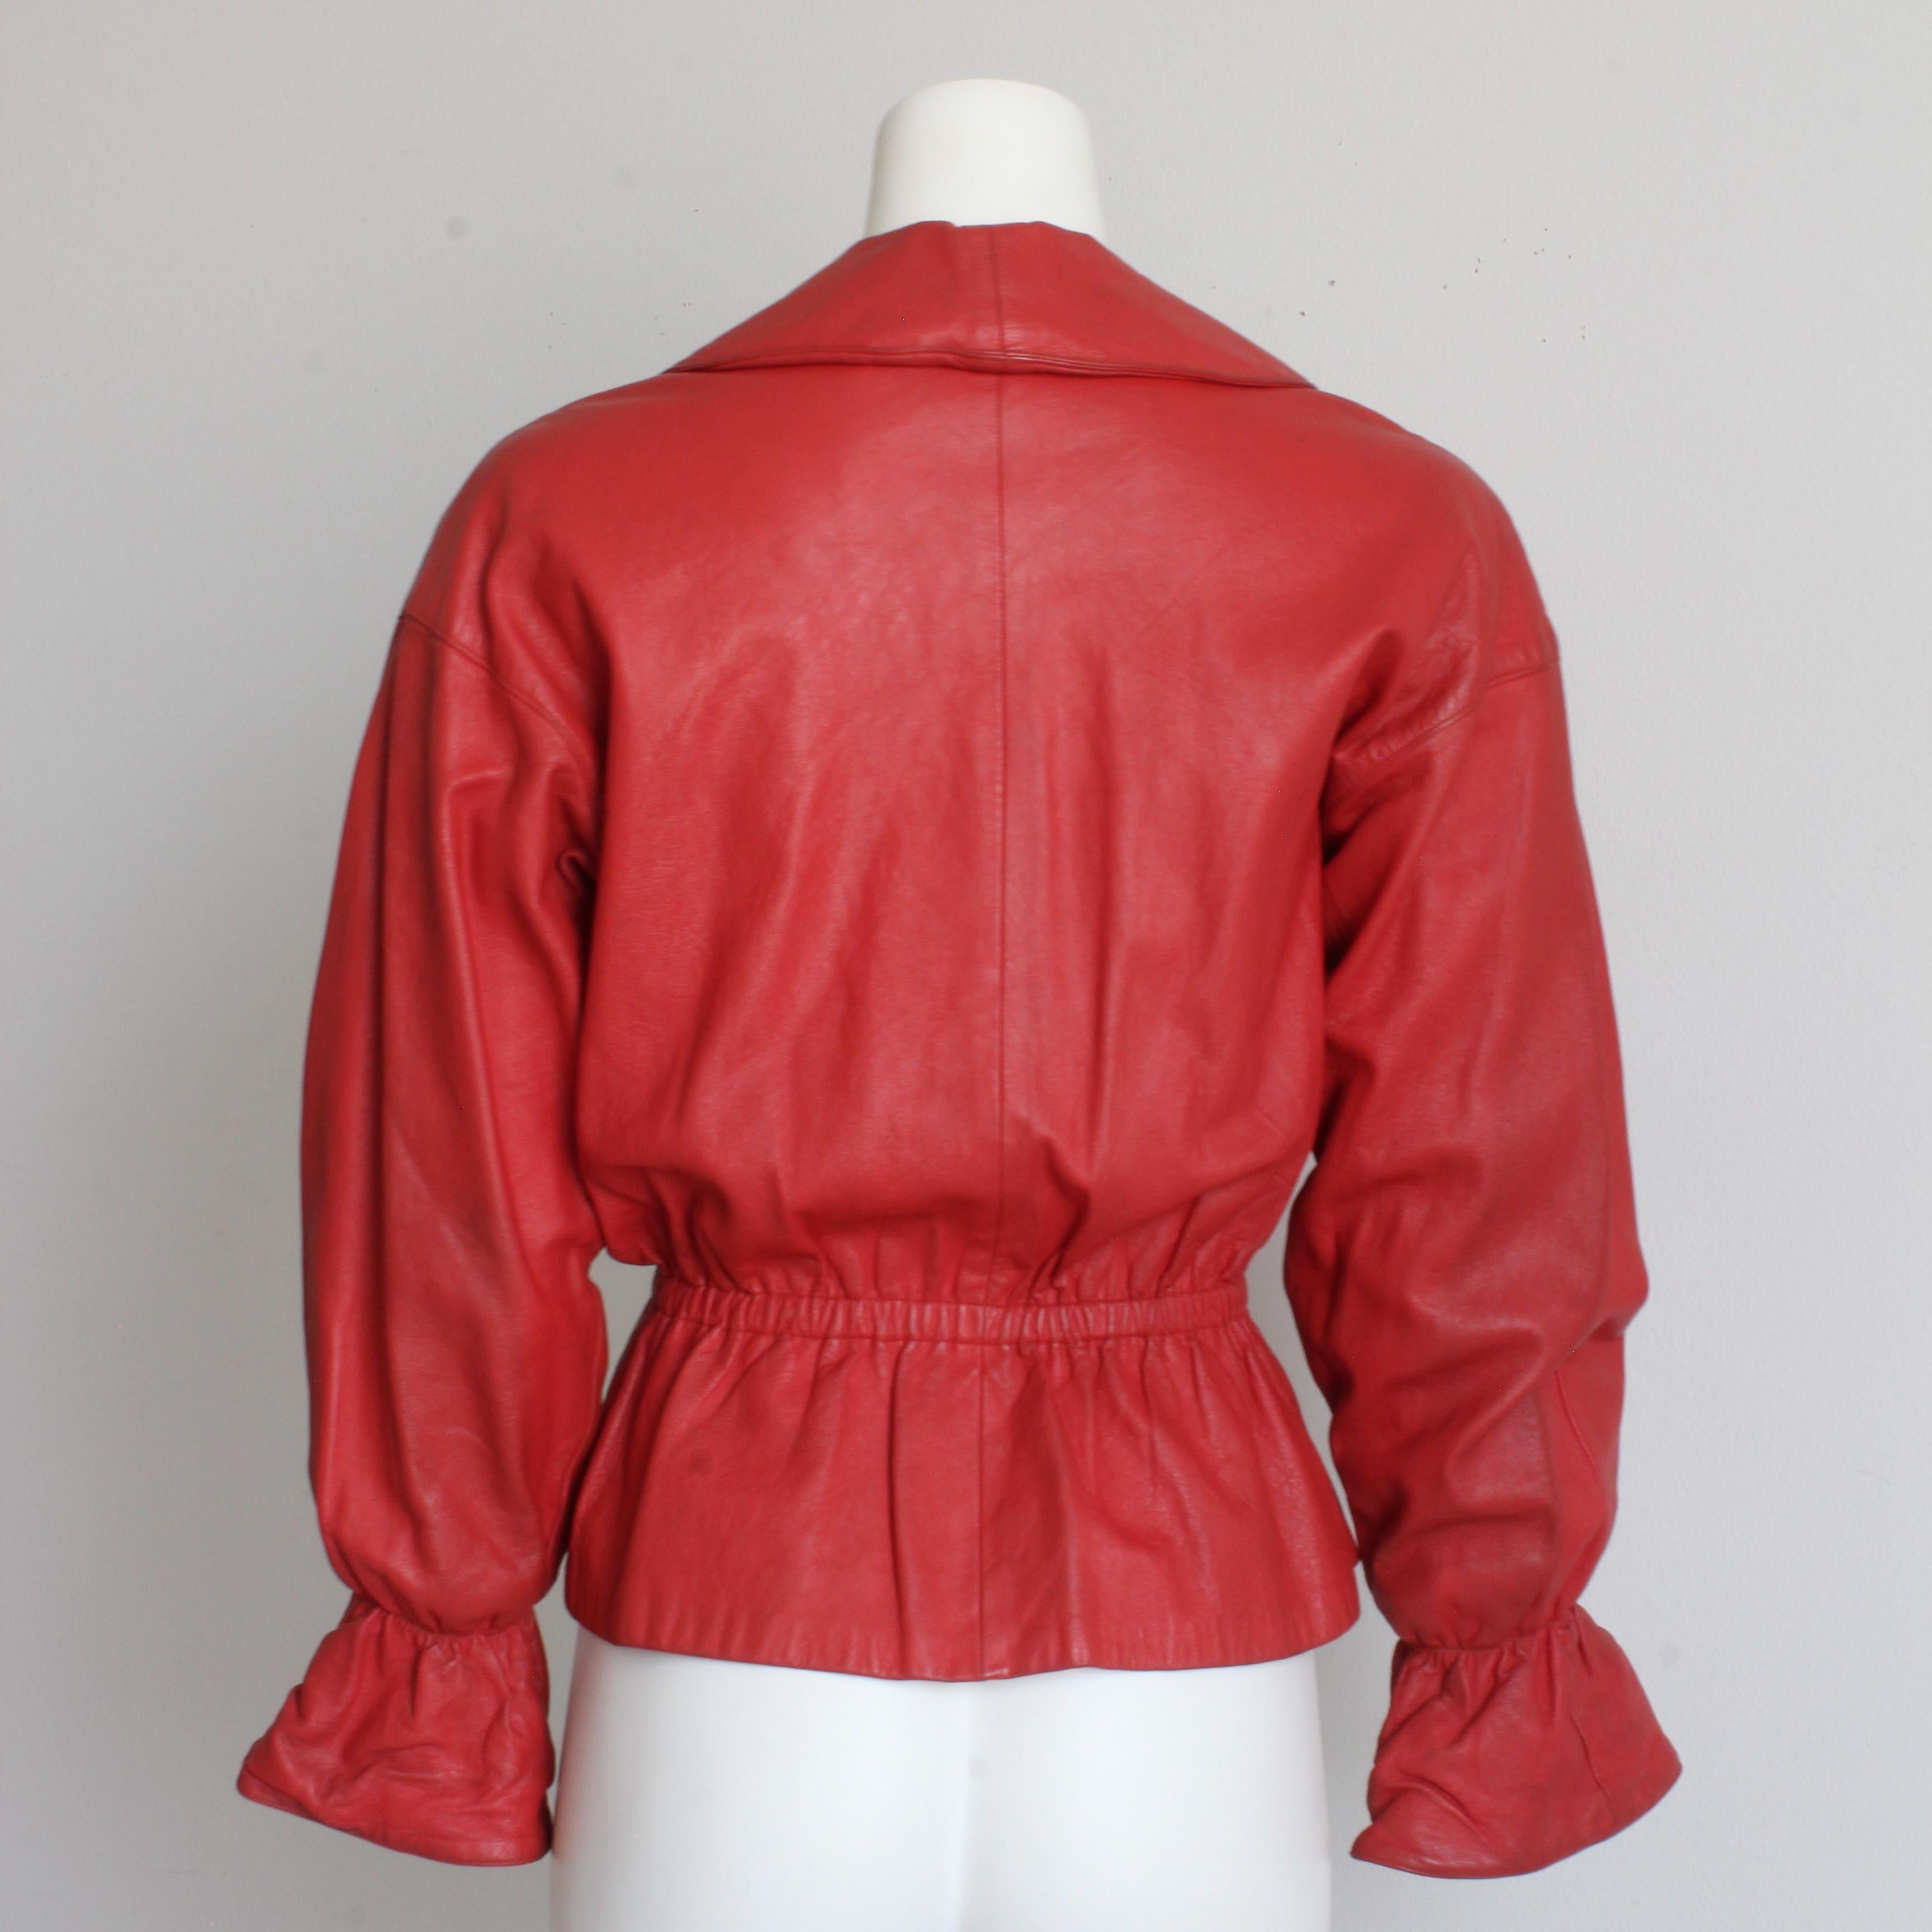 Bonnie Cashin for Sills Red Leather Jacket with Peplum Waist Rare Vintage 1960s  For Sale 1